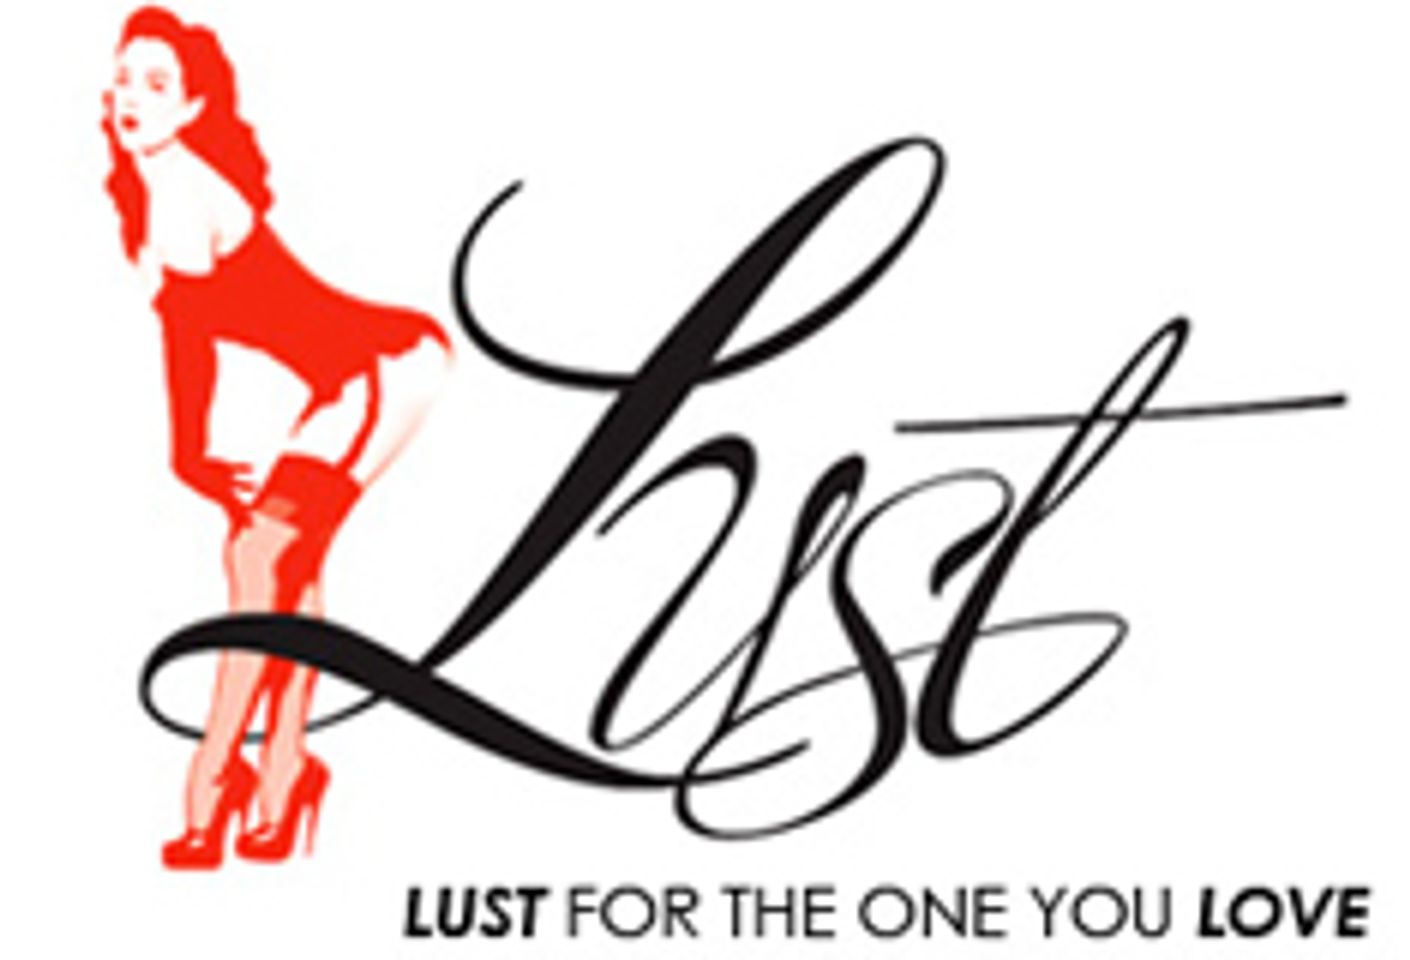 Lust Cosmetics, Entrenue join forces for U.S. Distribution